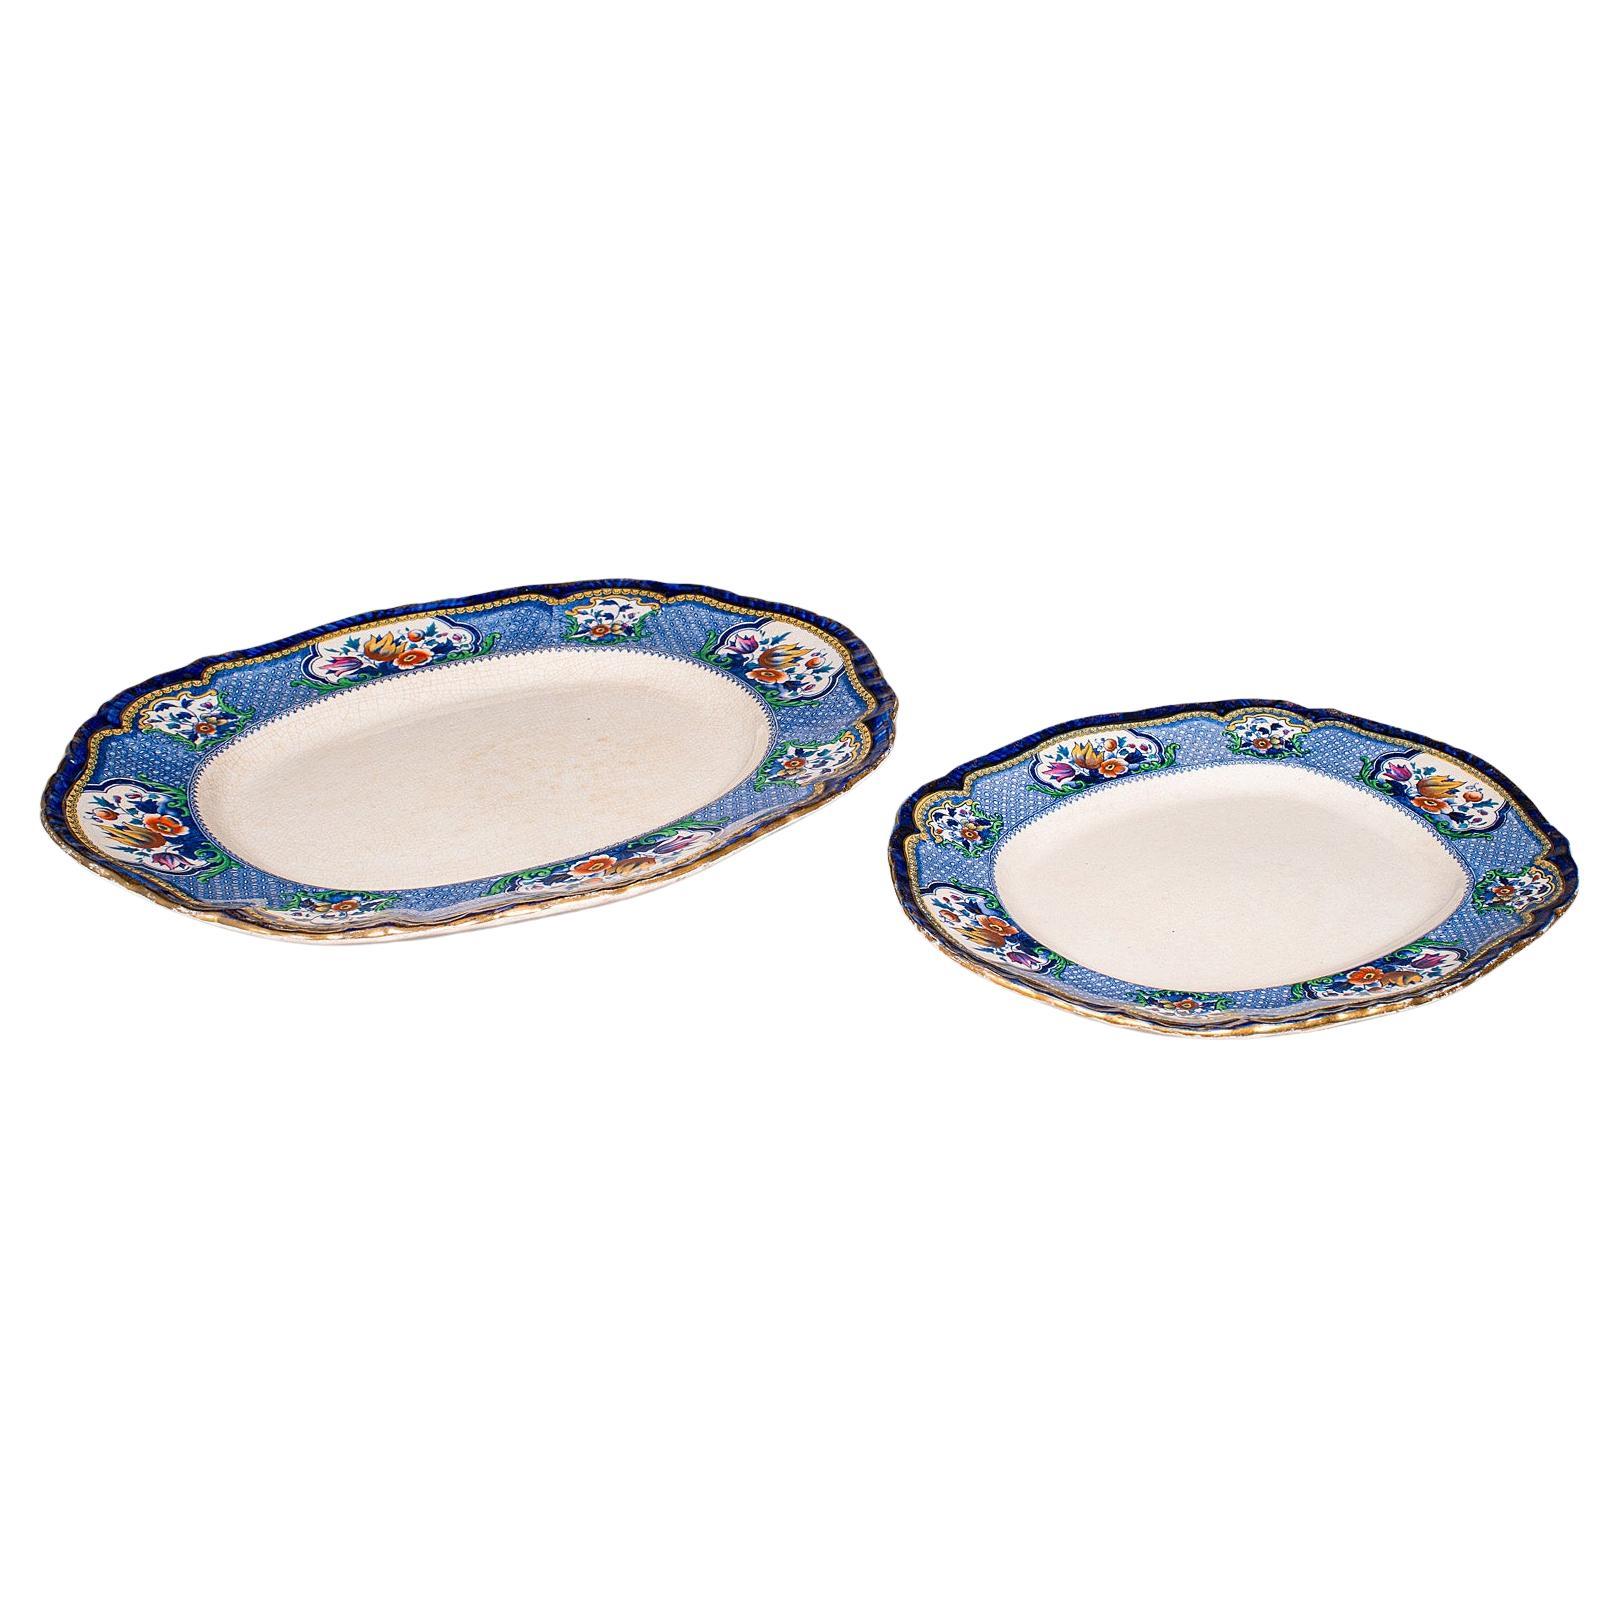 Set of 2 Large Antique Meat & Poultry Platters, English Ceramic, Victorian, 1900